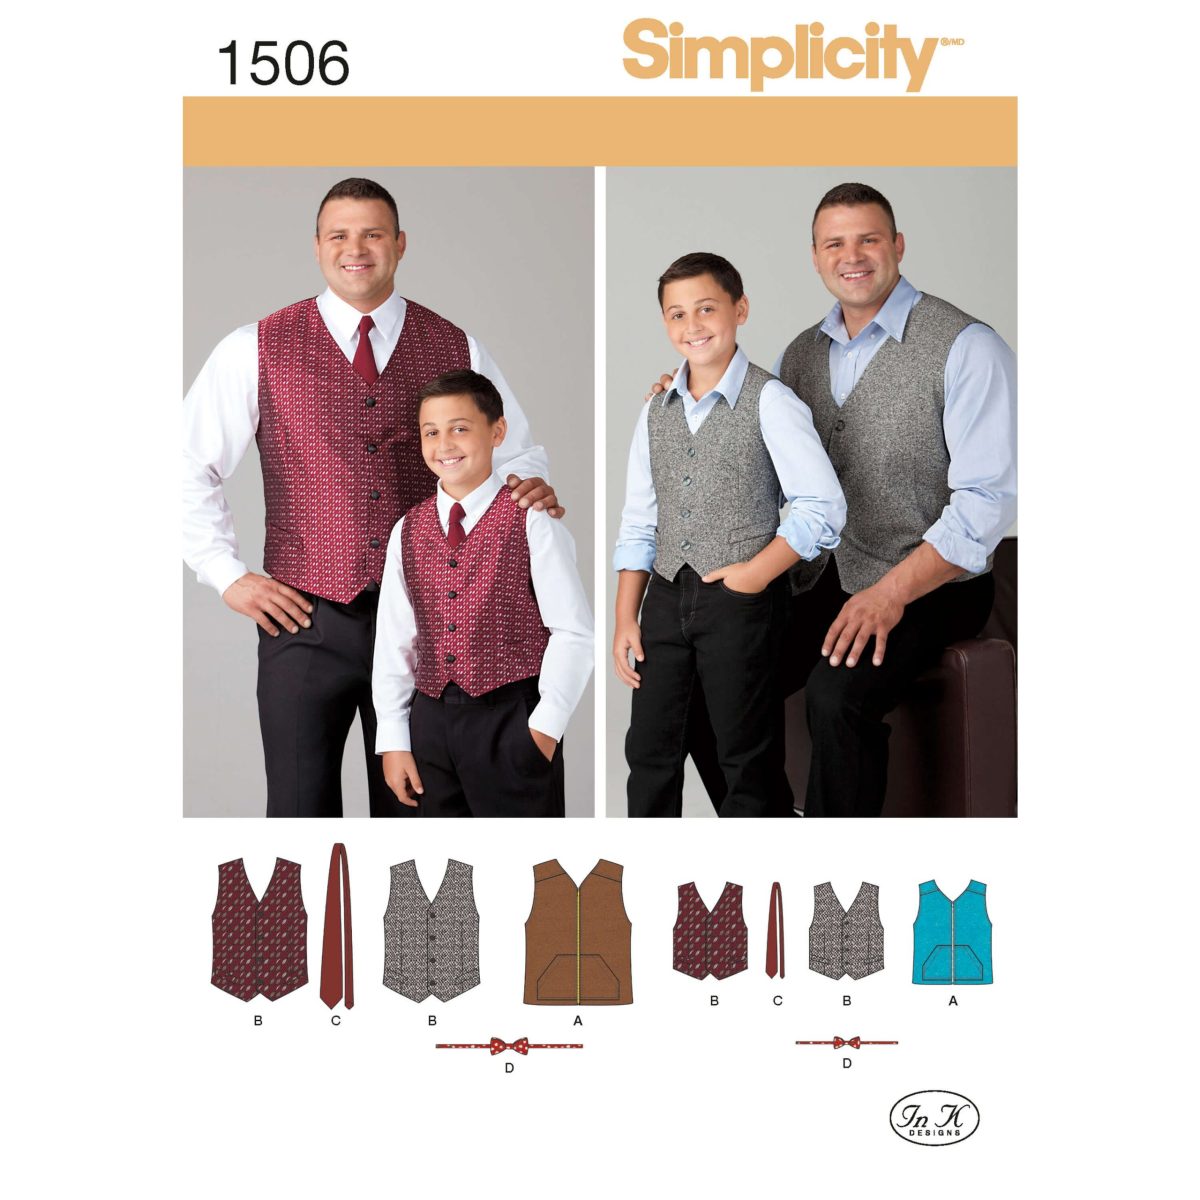 Simplicity Sewing Pattern 1506 Husky Boys' and Big and Tall Men's Vests